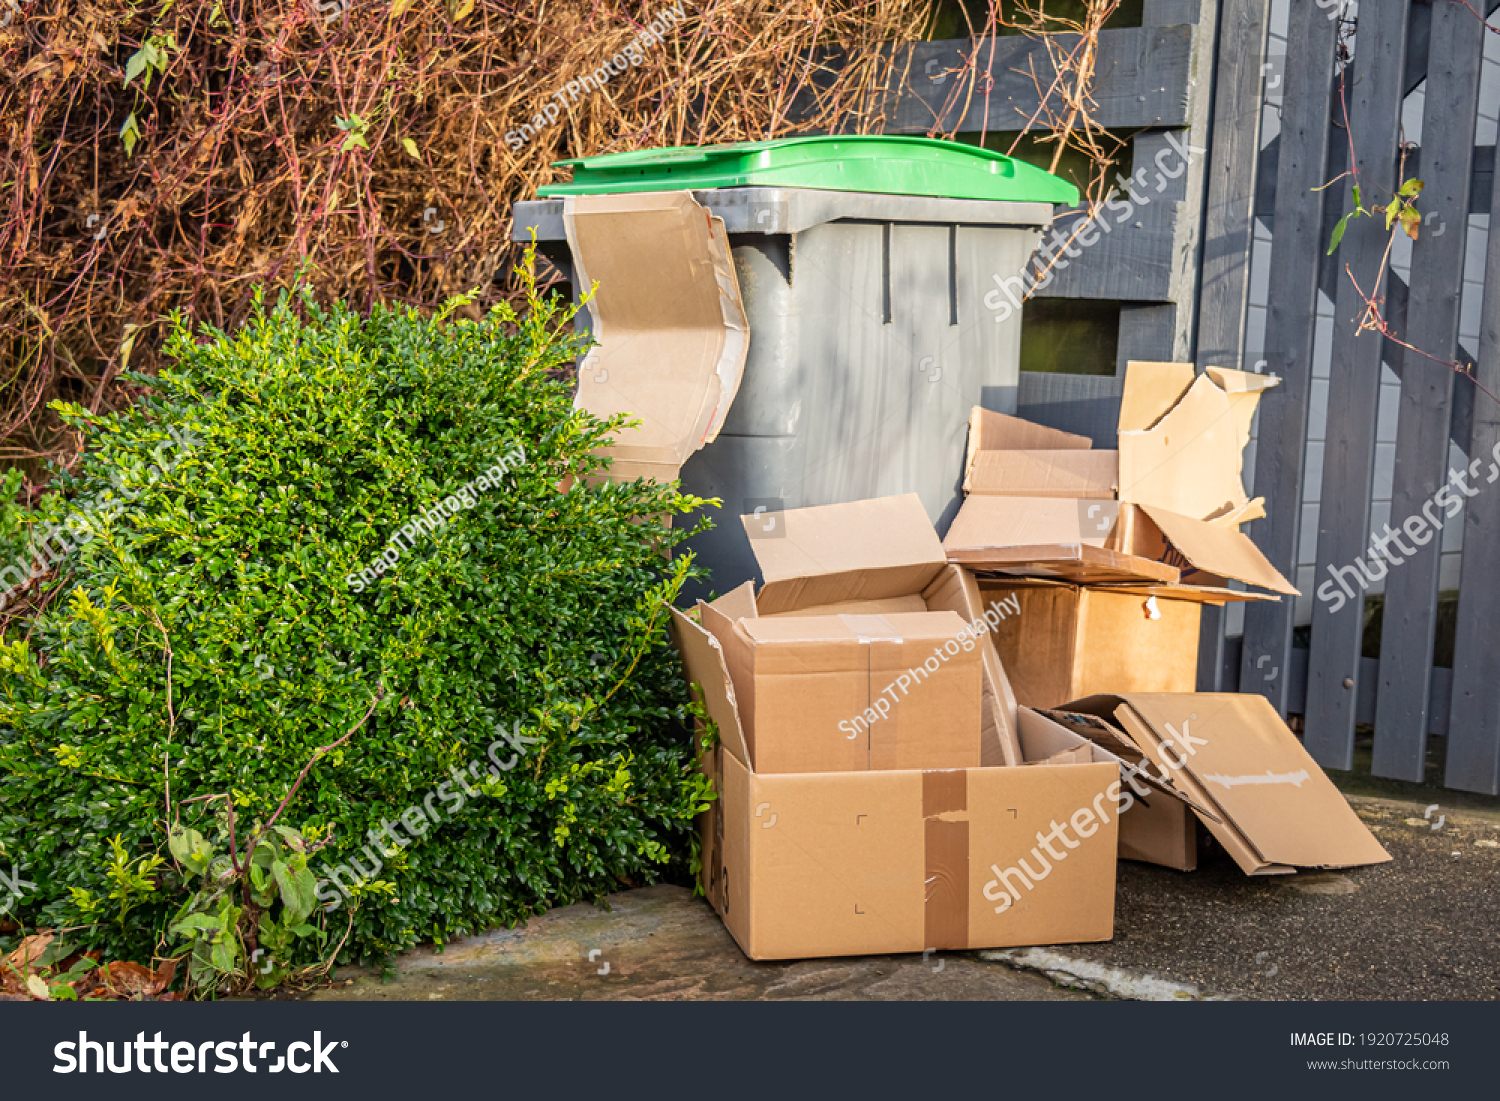 Excess cardboard packaging waste as a result of increased postal deliveries as a result of the COVID-19 pandemic #1920725048